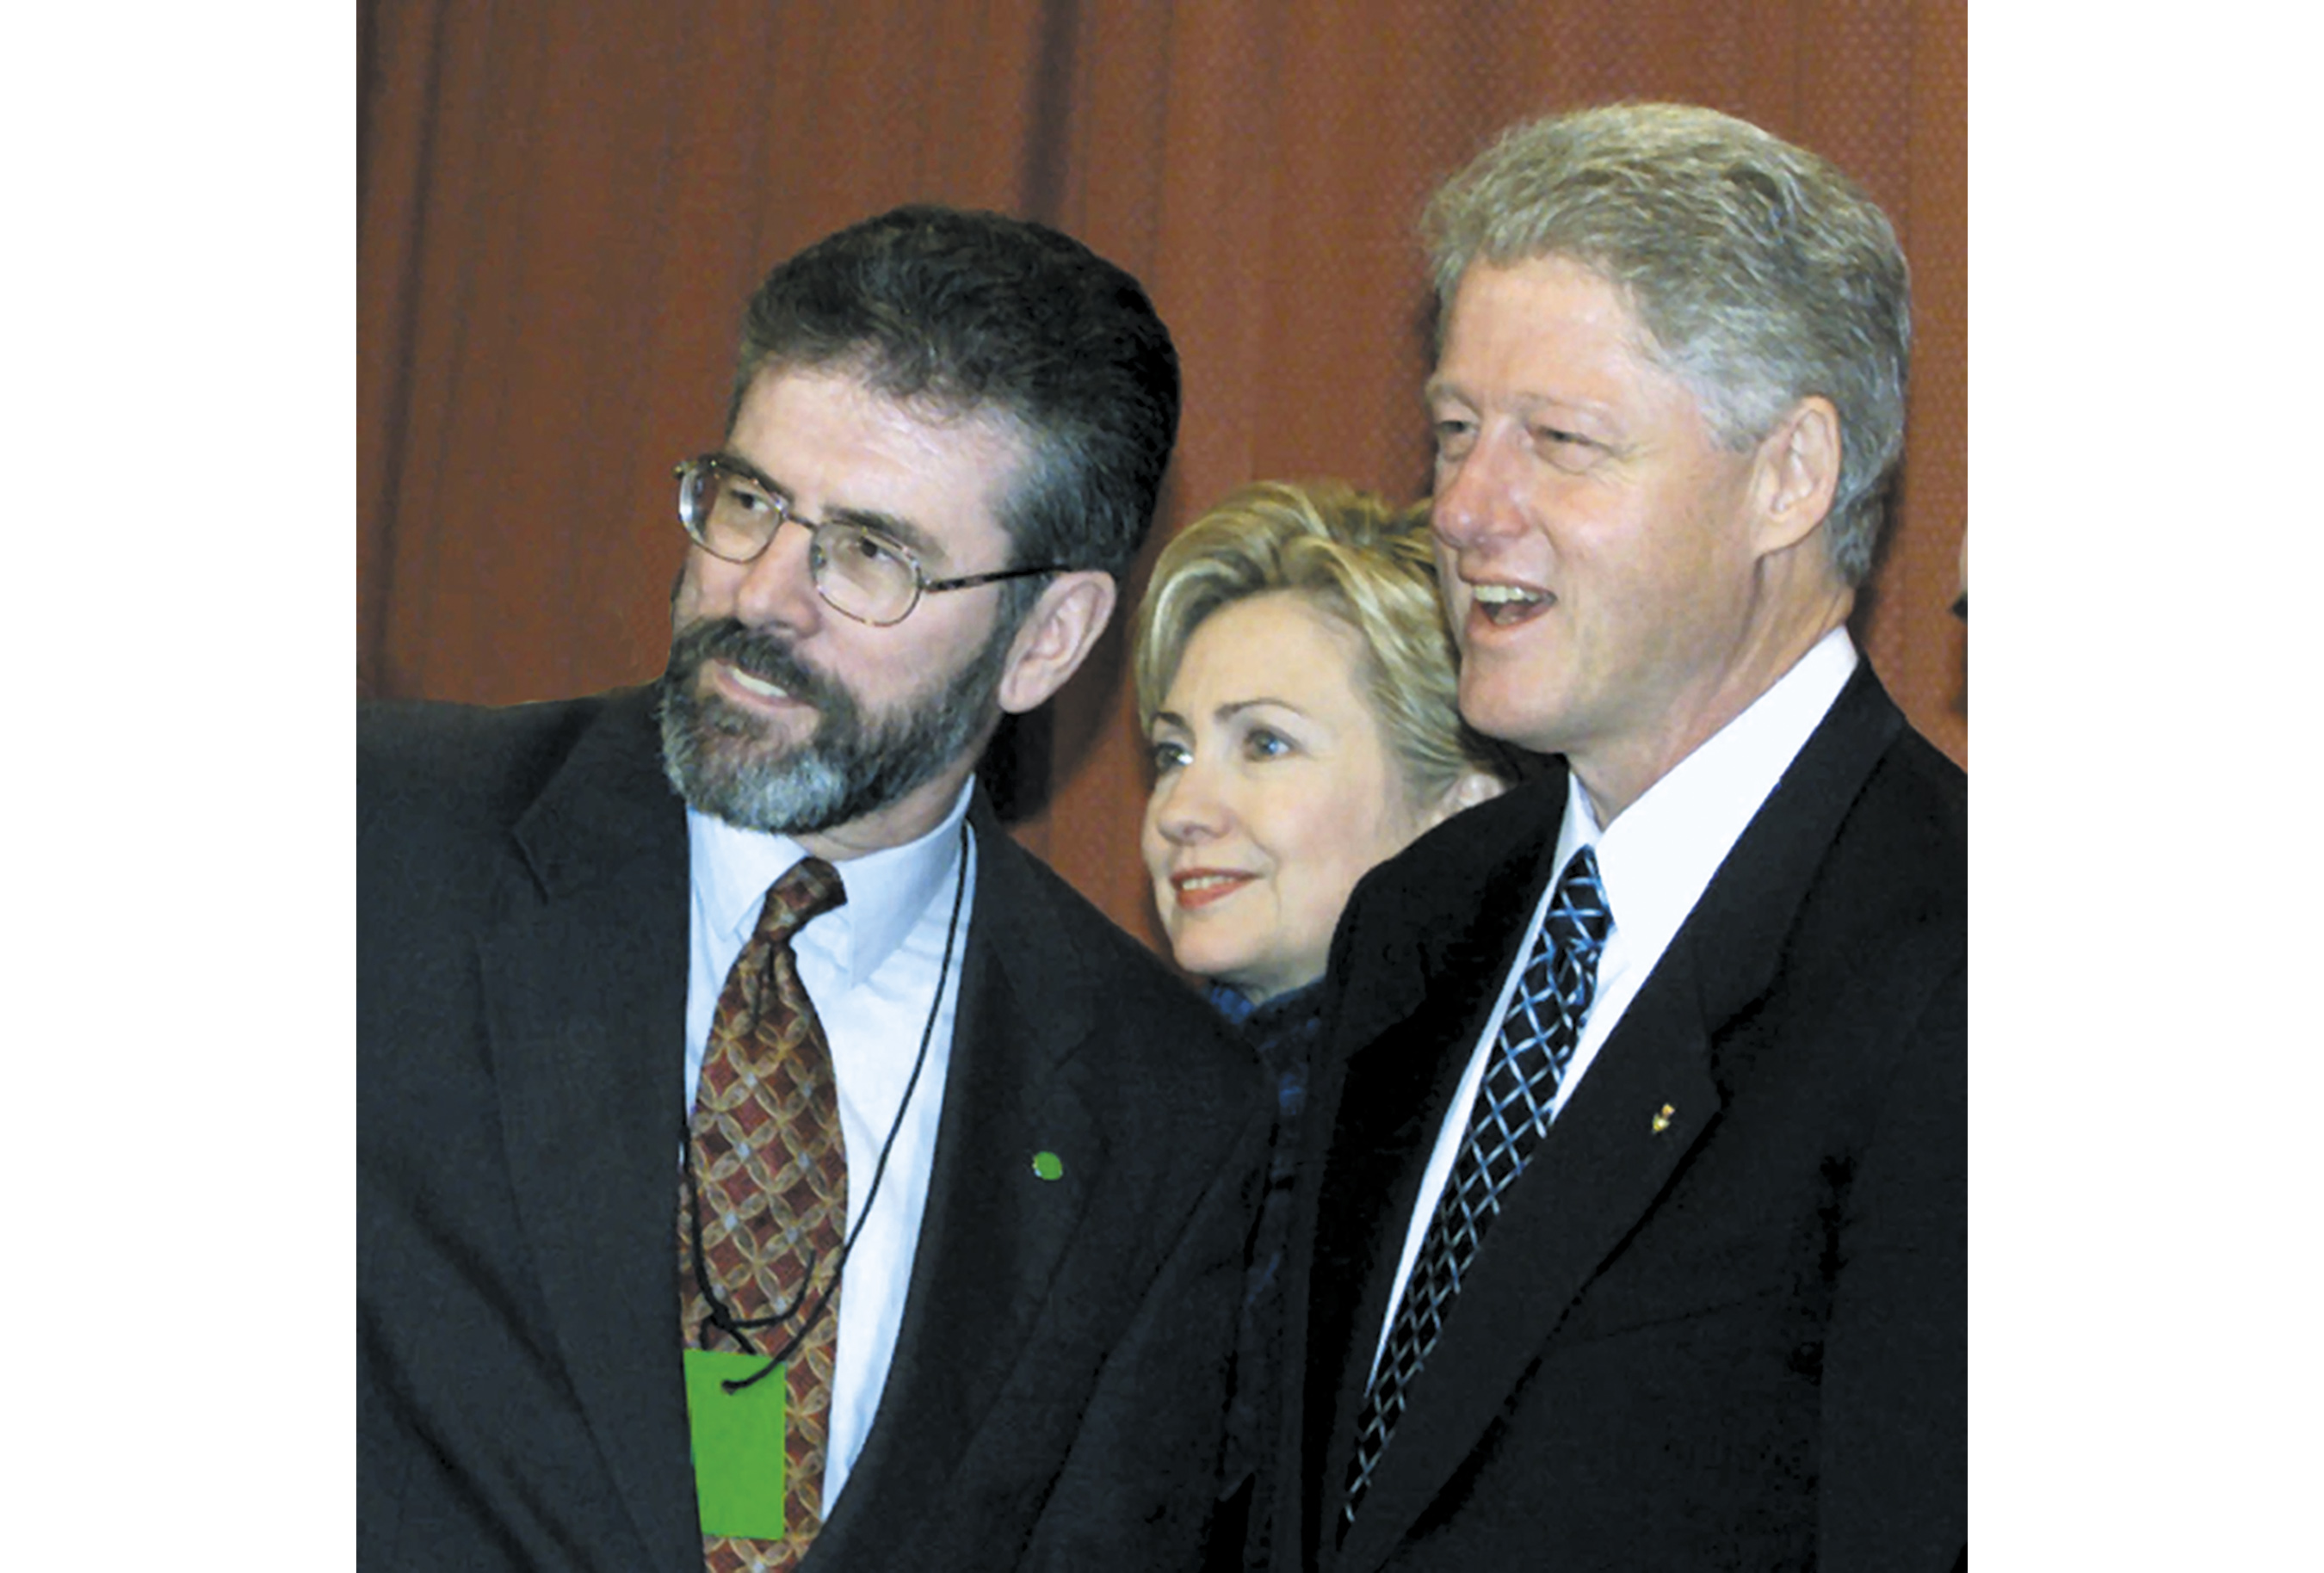 President Clinton and Irish Prime Minister Bertie Ahern, right, talk with Gerry Adams, president of Sinn Fein, left, at a reception at the Guinness brewery in Dublin. Clinton is on the first day of a three-day visit. First lady Hillary Rodham Clinton is standing in the background. (AP Photo/Ron Edmonds)